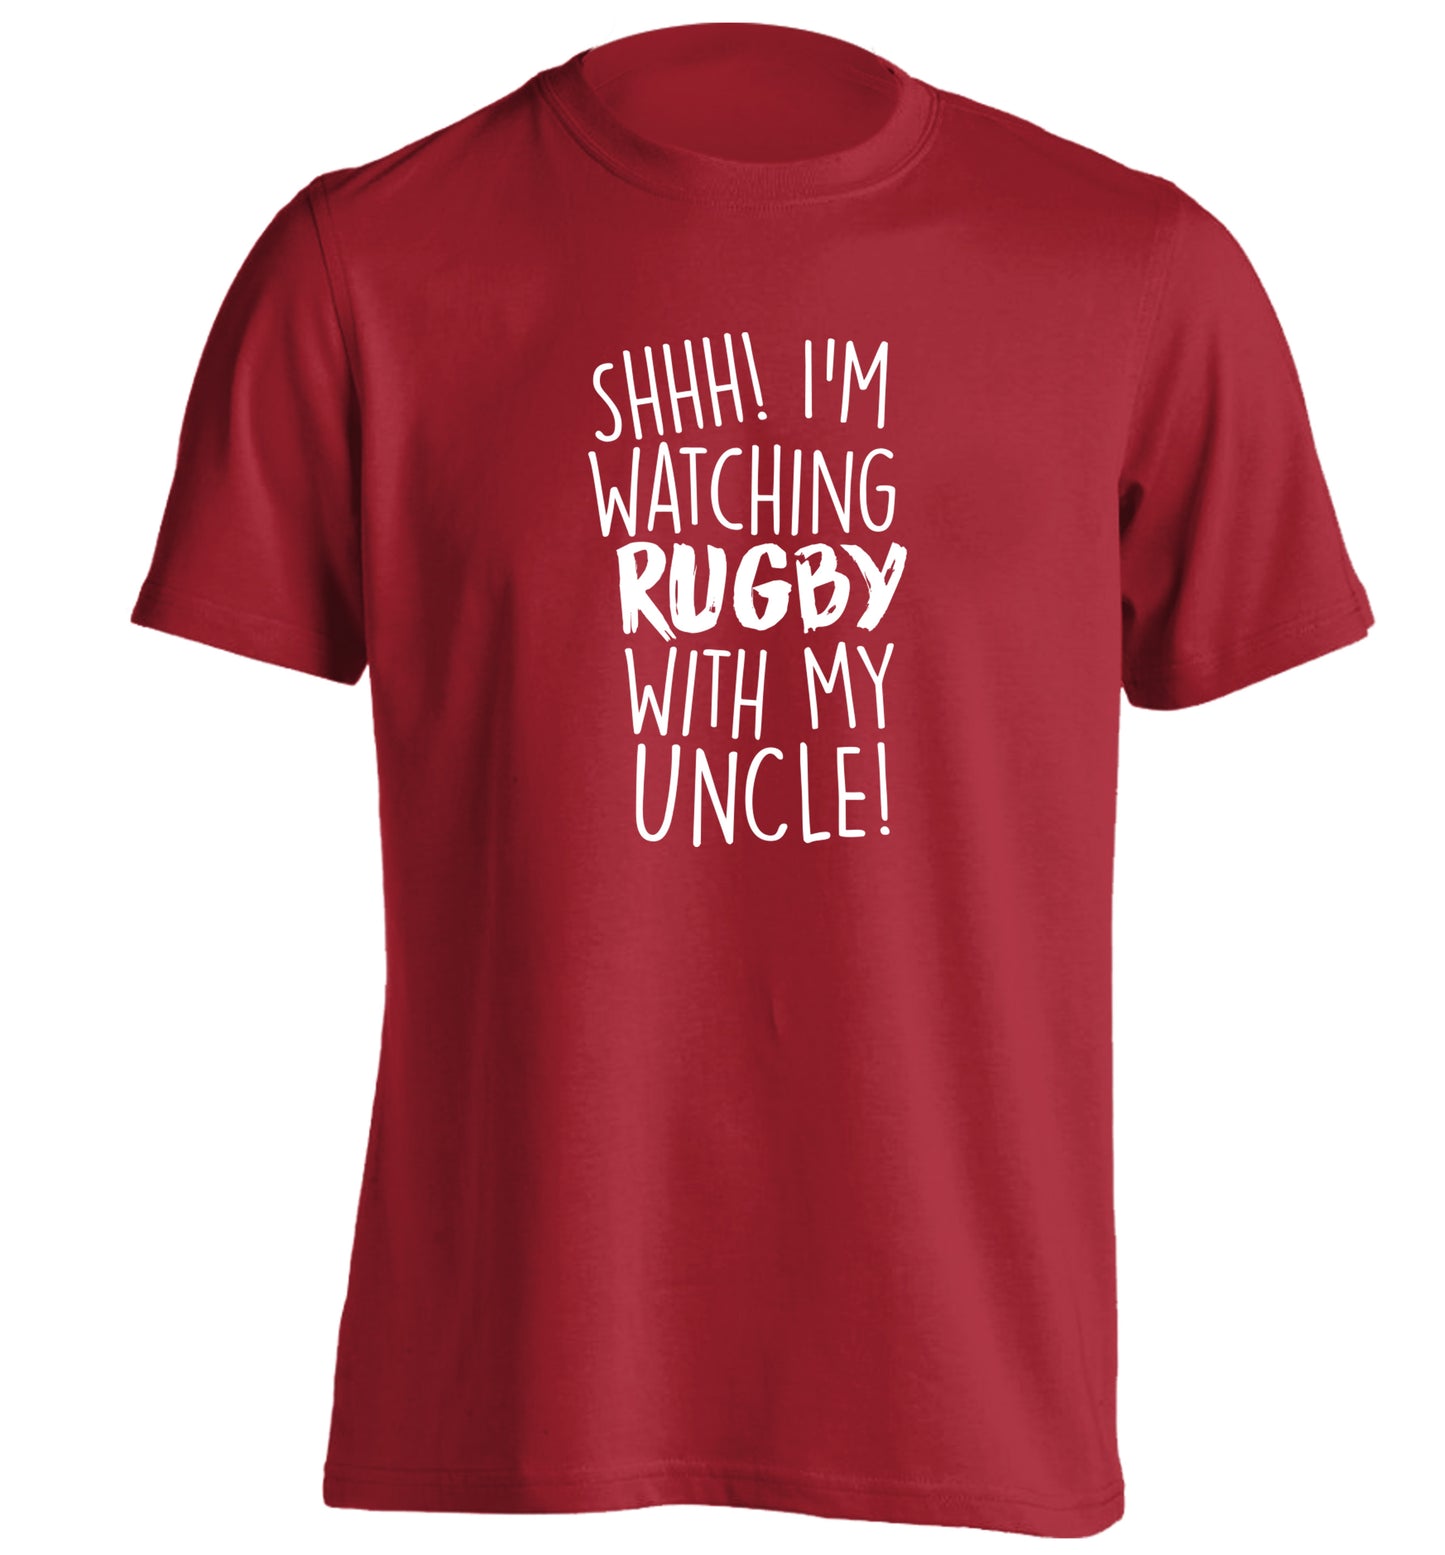 Shh.. I'm watching rugby with my uncle adults unisex red Tshirt 2XL